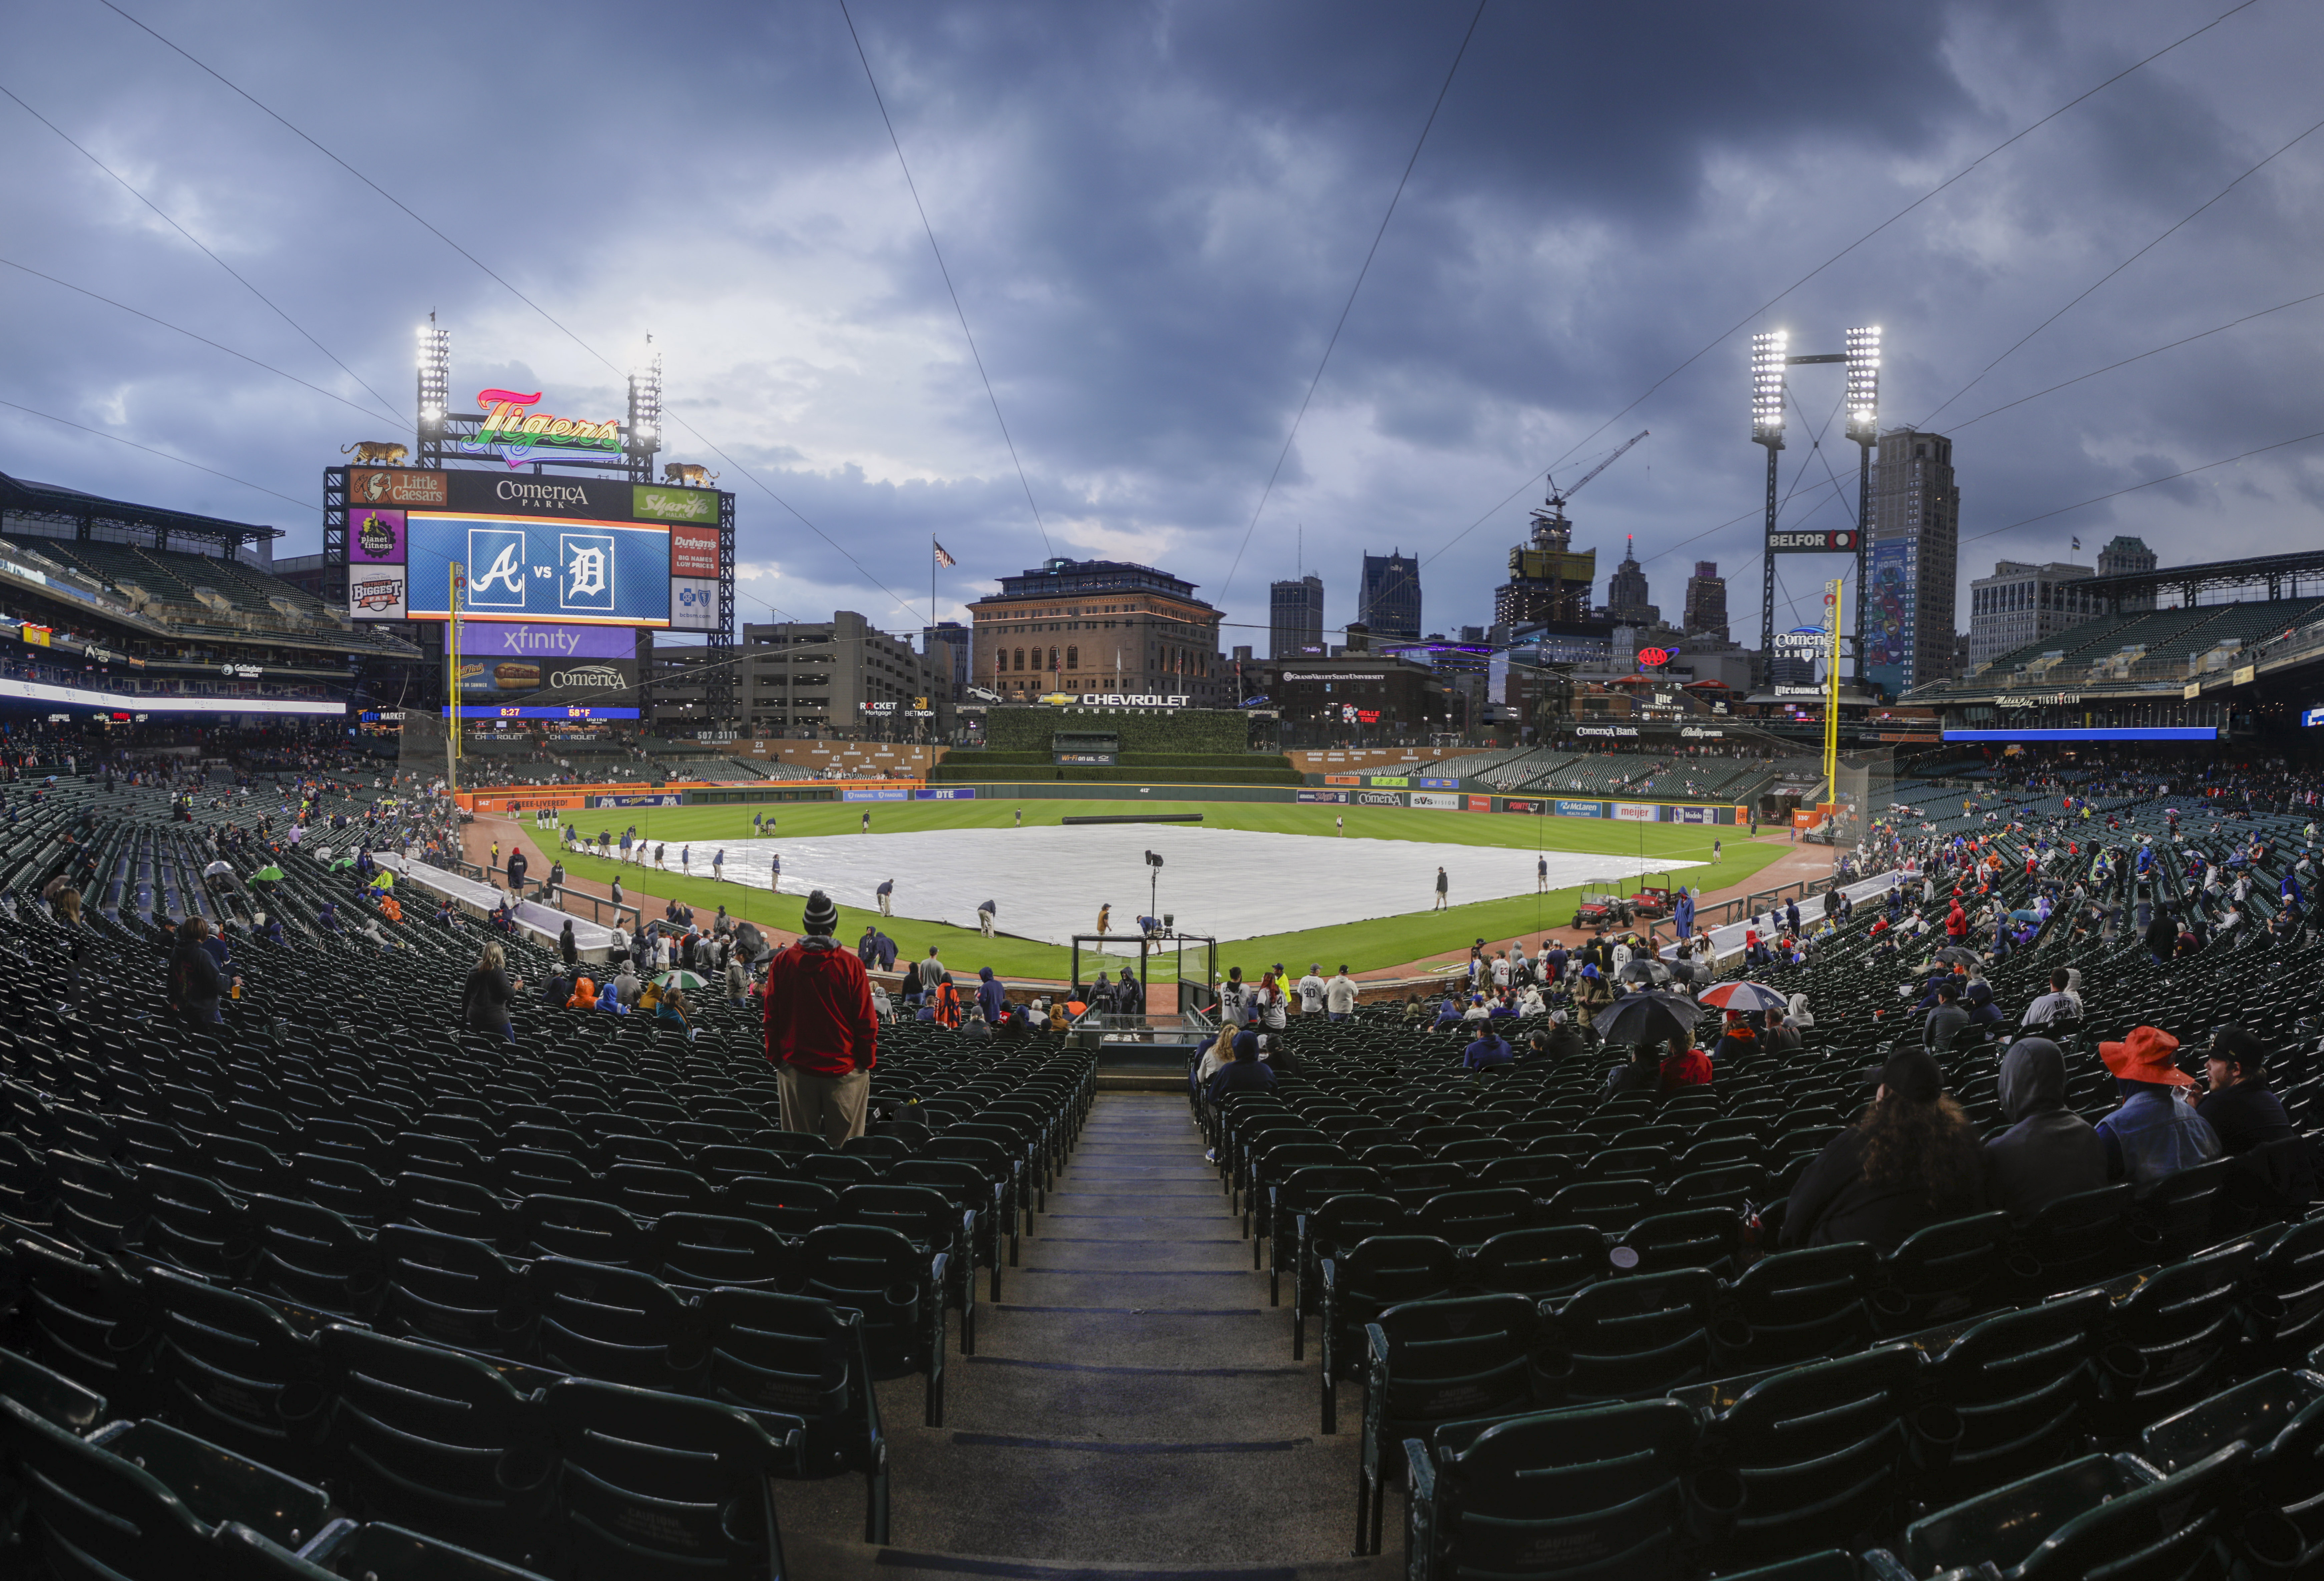 Braves-Tigers game rained out; DH on Wednesday